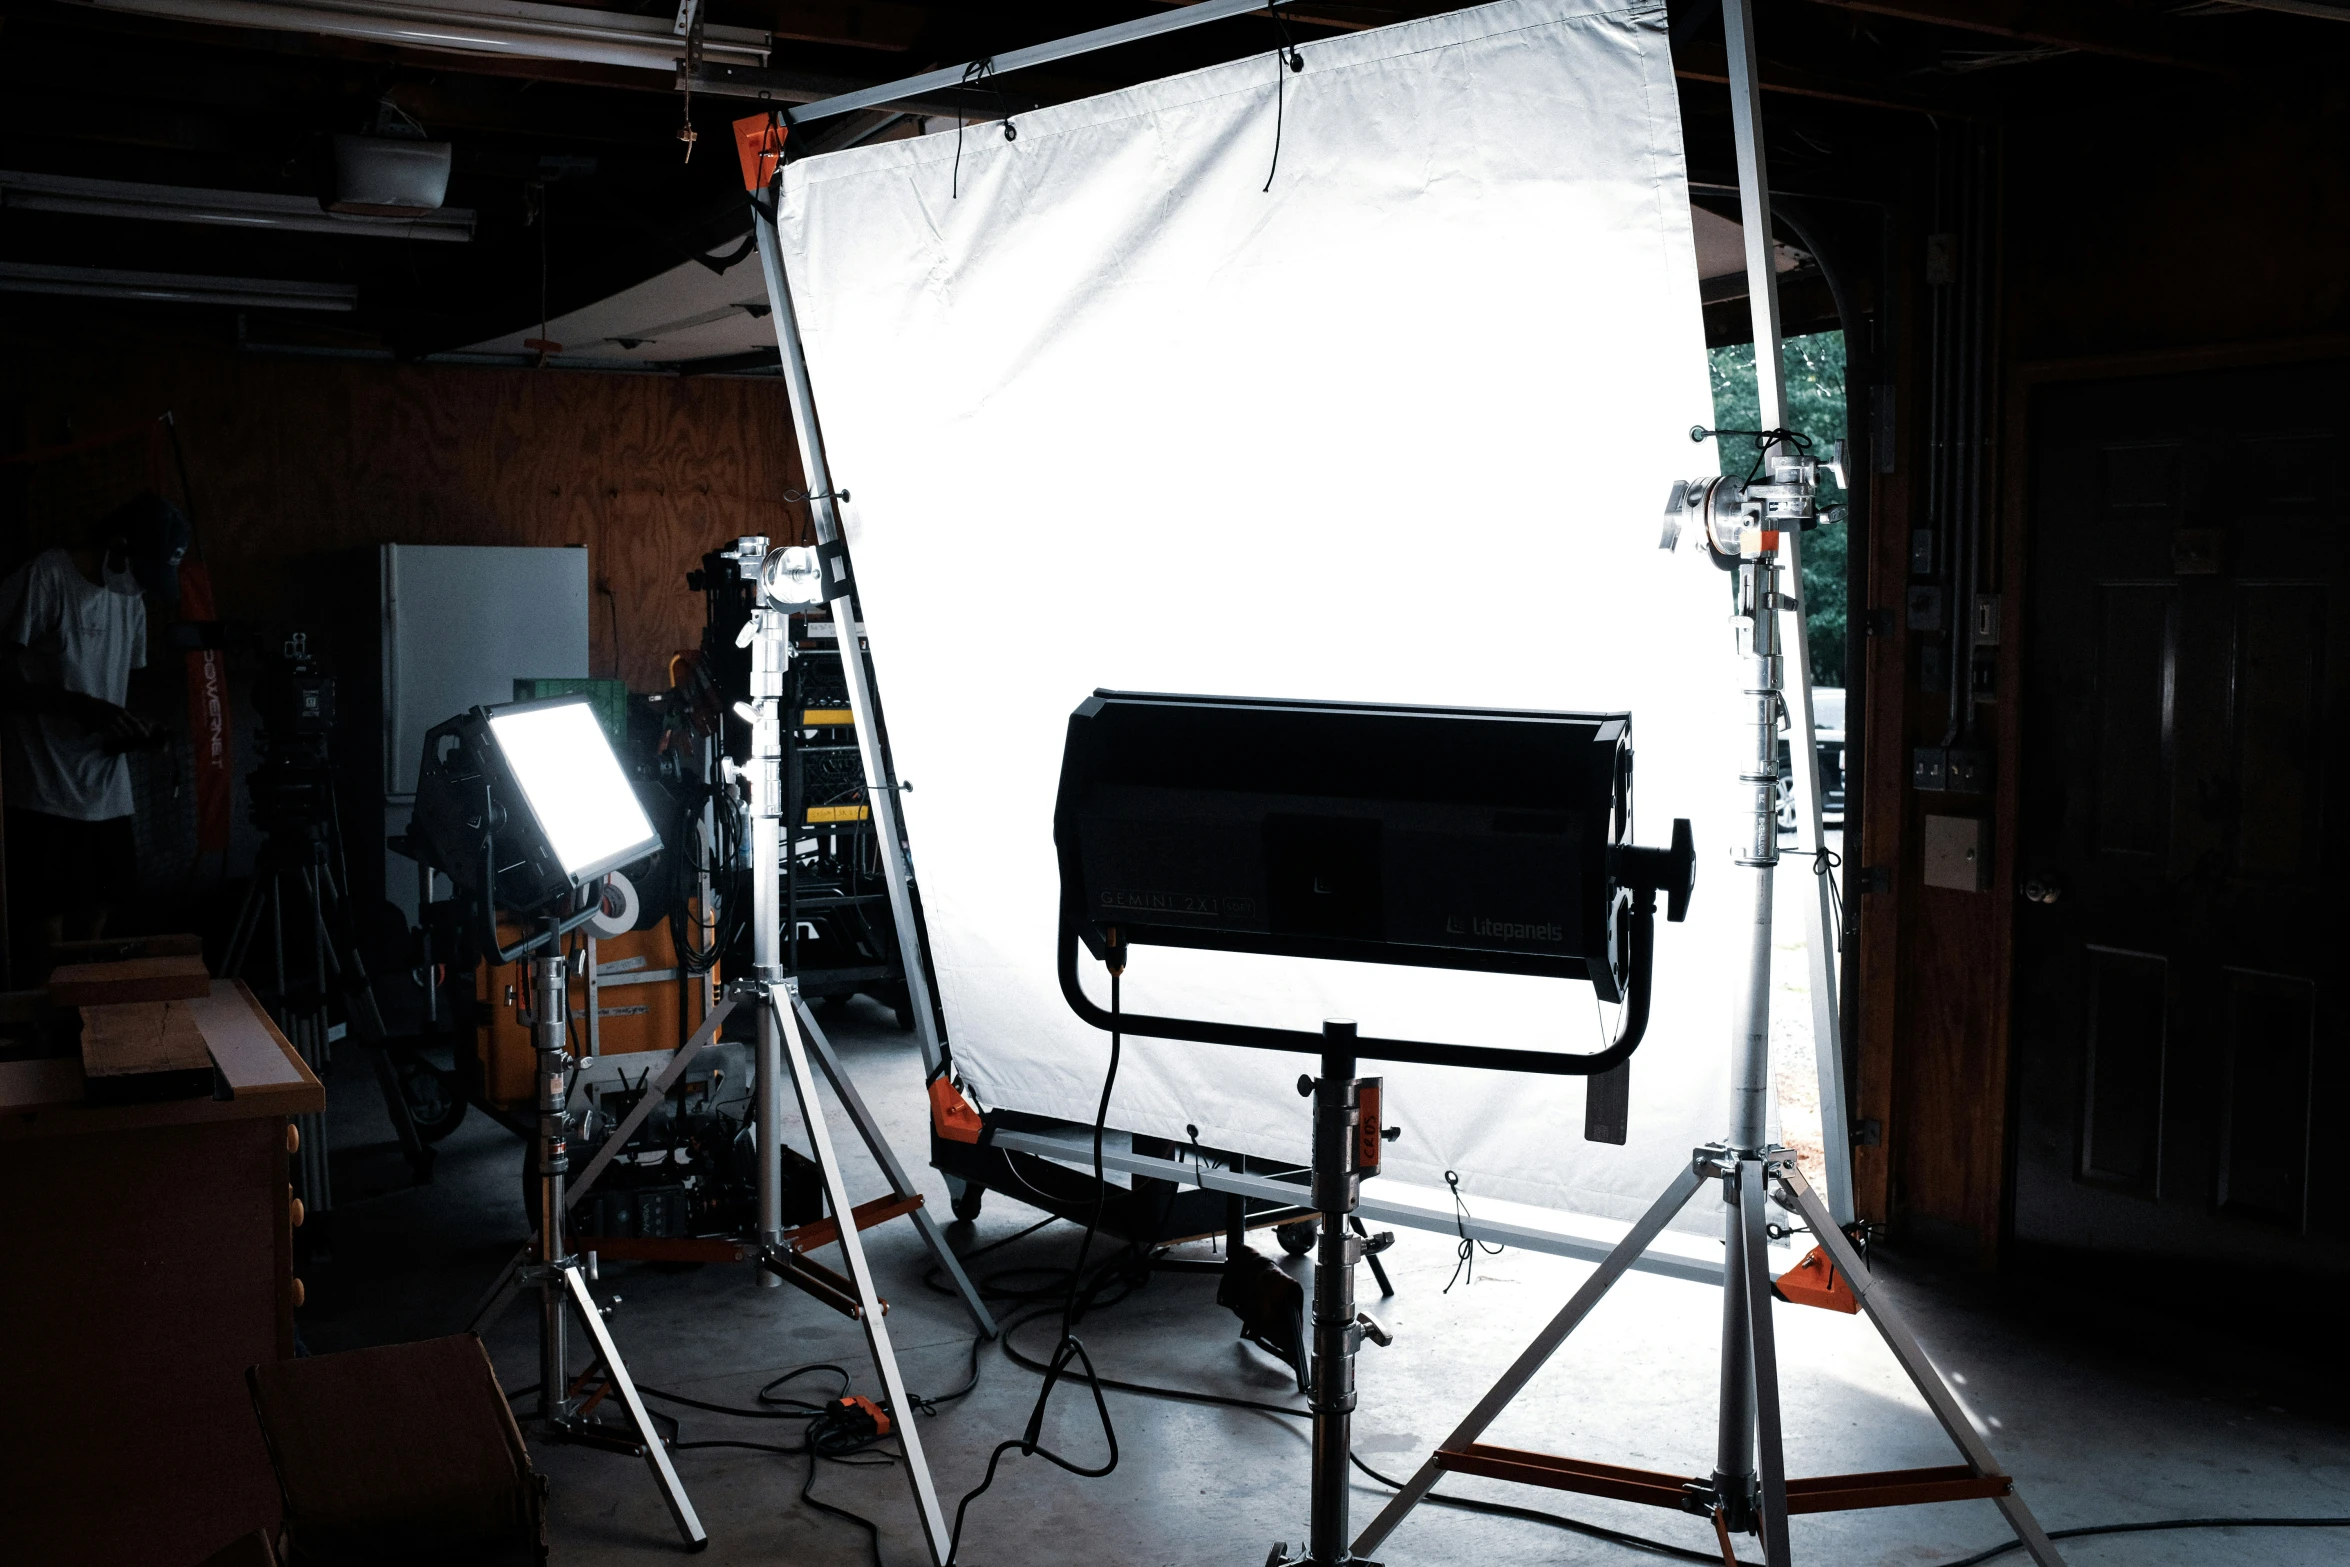 lighting equipment in dark space with one light lit up